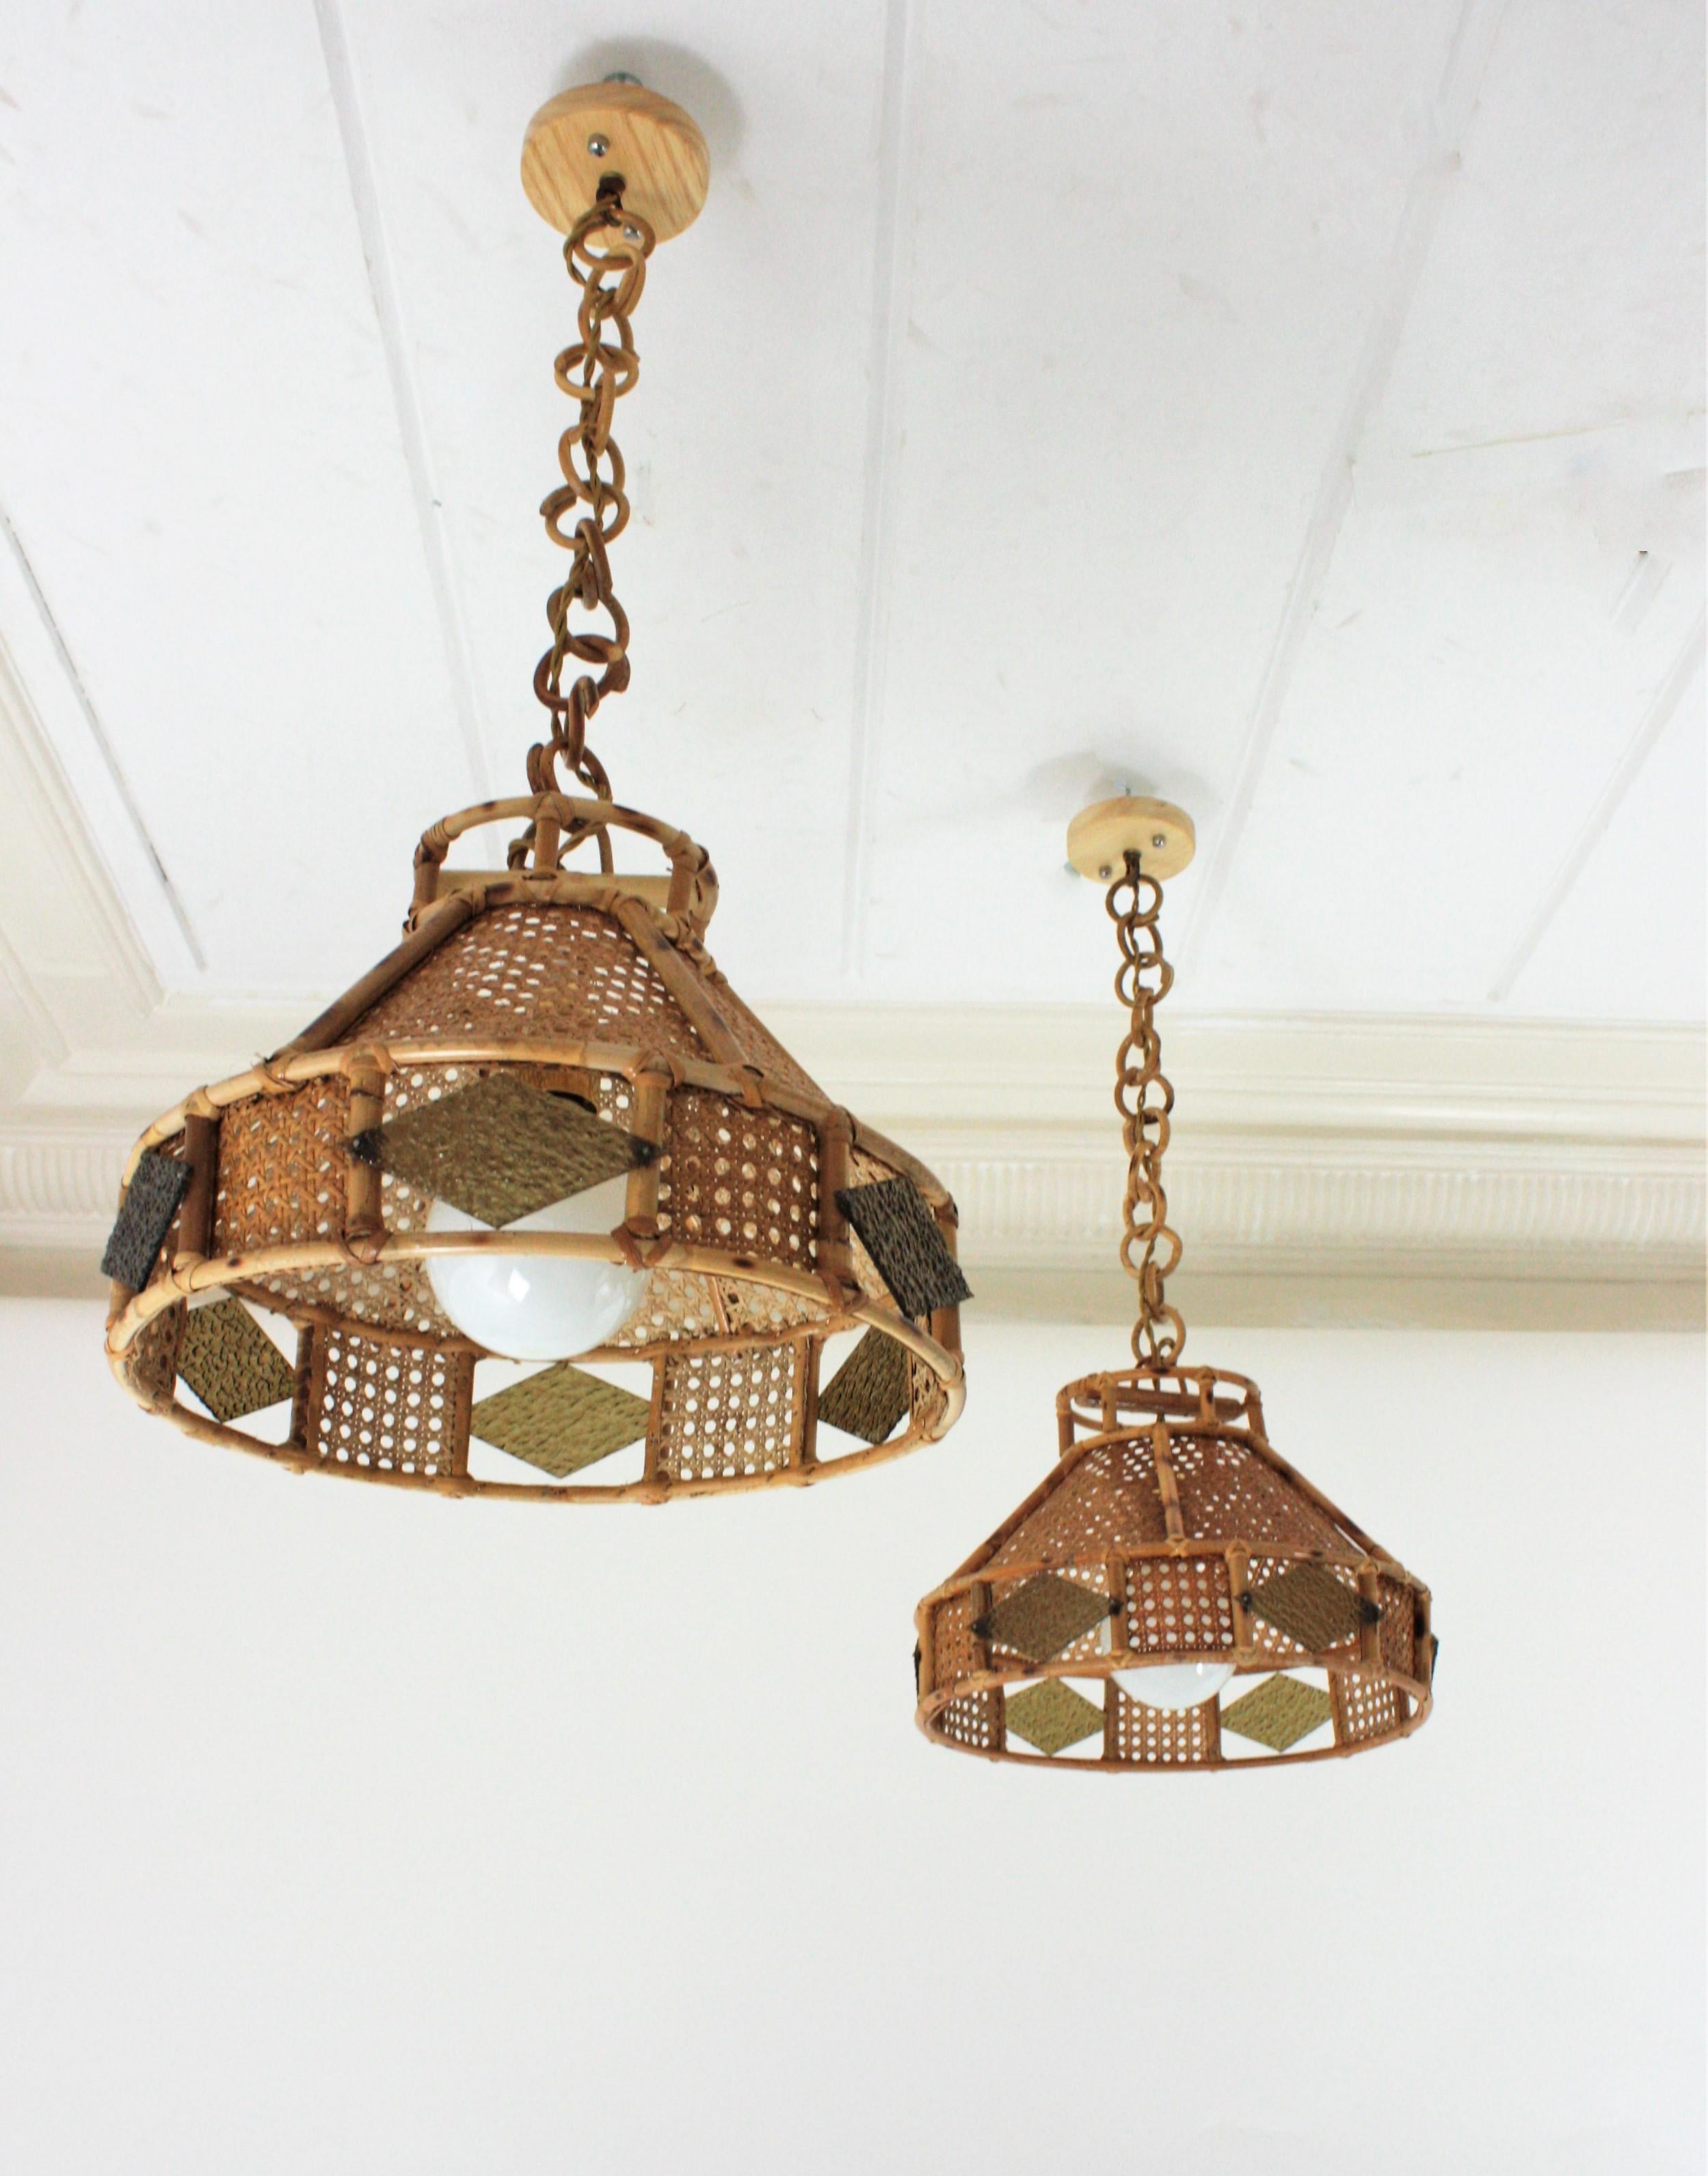 Woven Italian Modern Wicker Wire Rattan Pendant Hanging Lights with Glass Accent, Pair For Sale